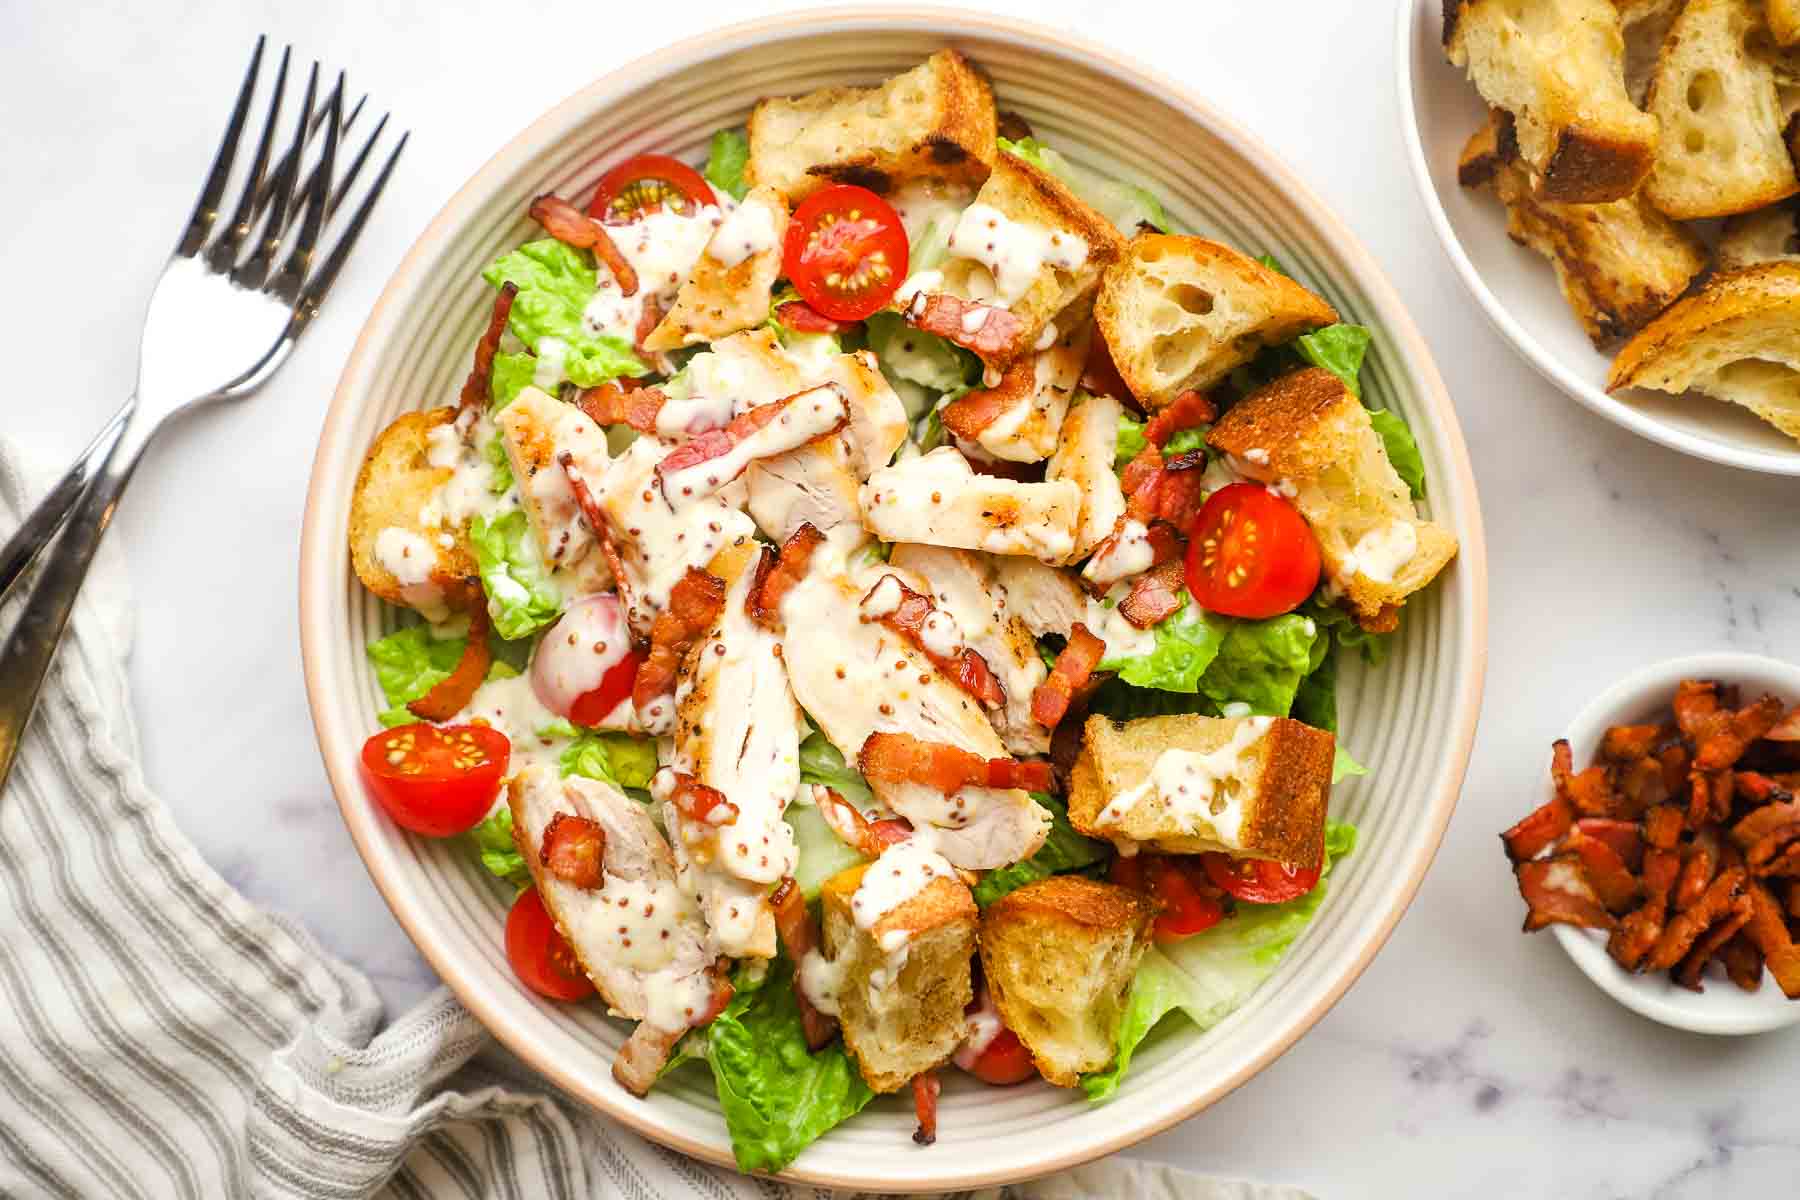 anoverhead view of a blt  salad with chicken on a plate